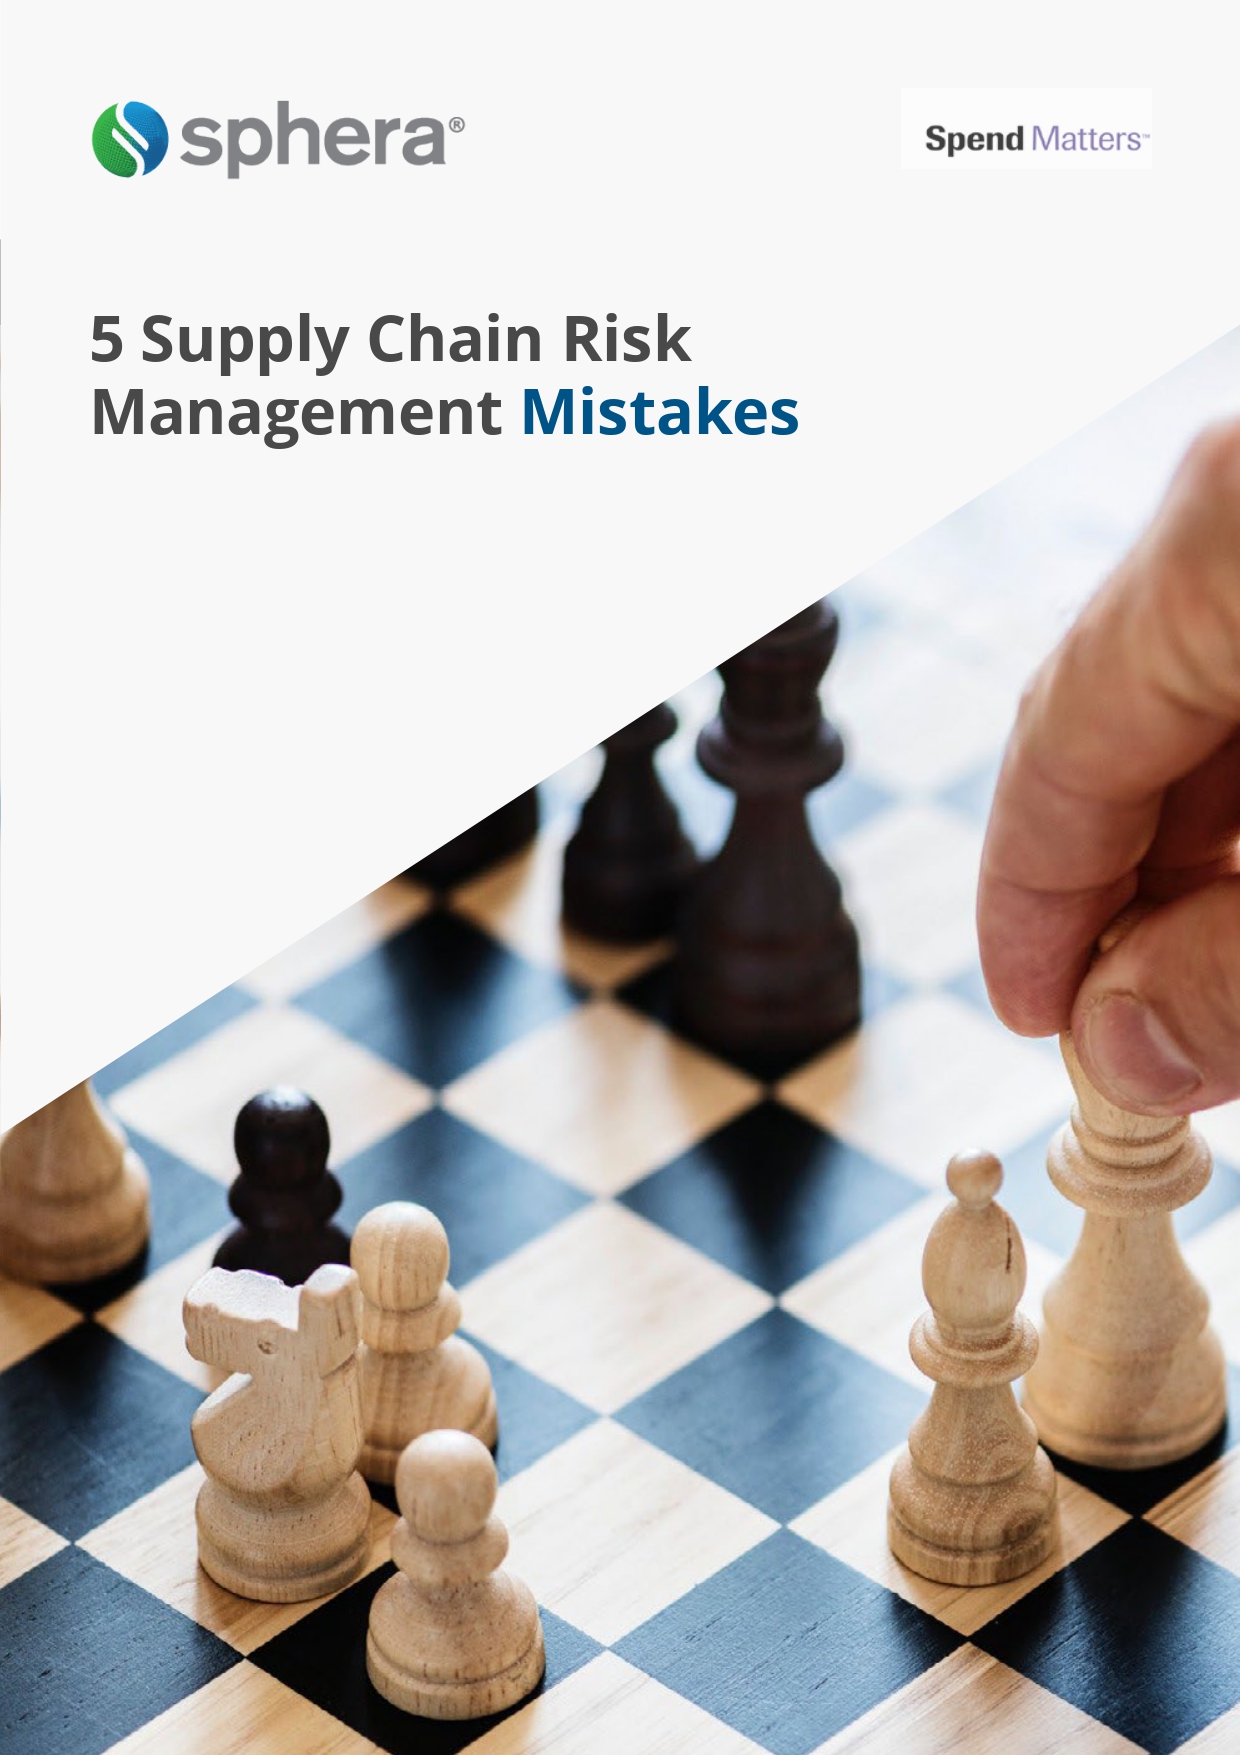 5 Supply Chain Risk Management Mistakes